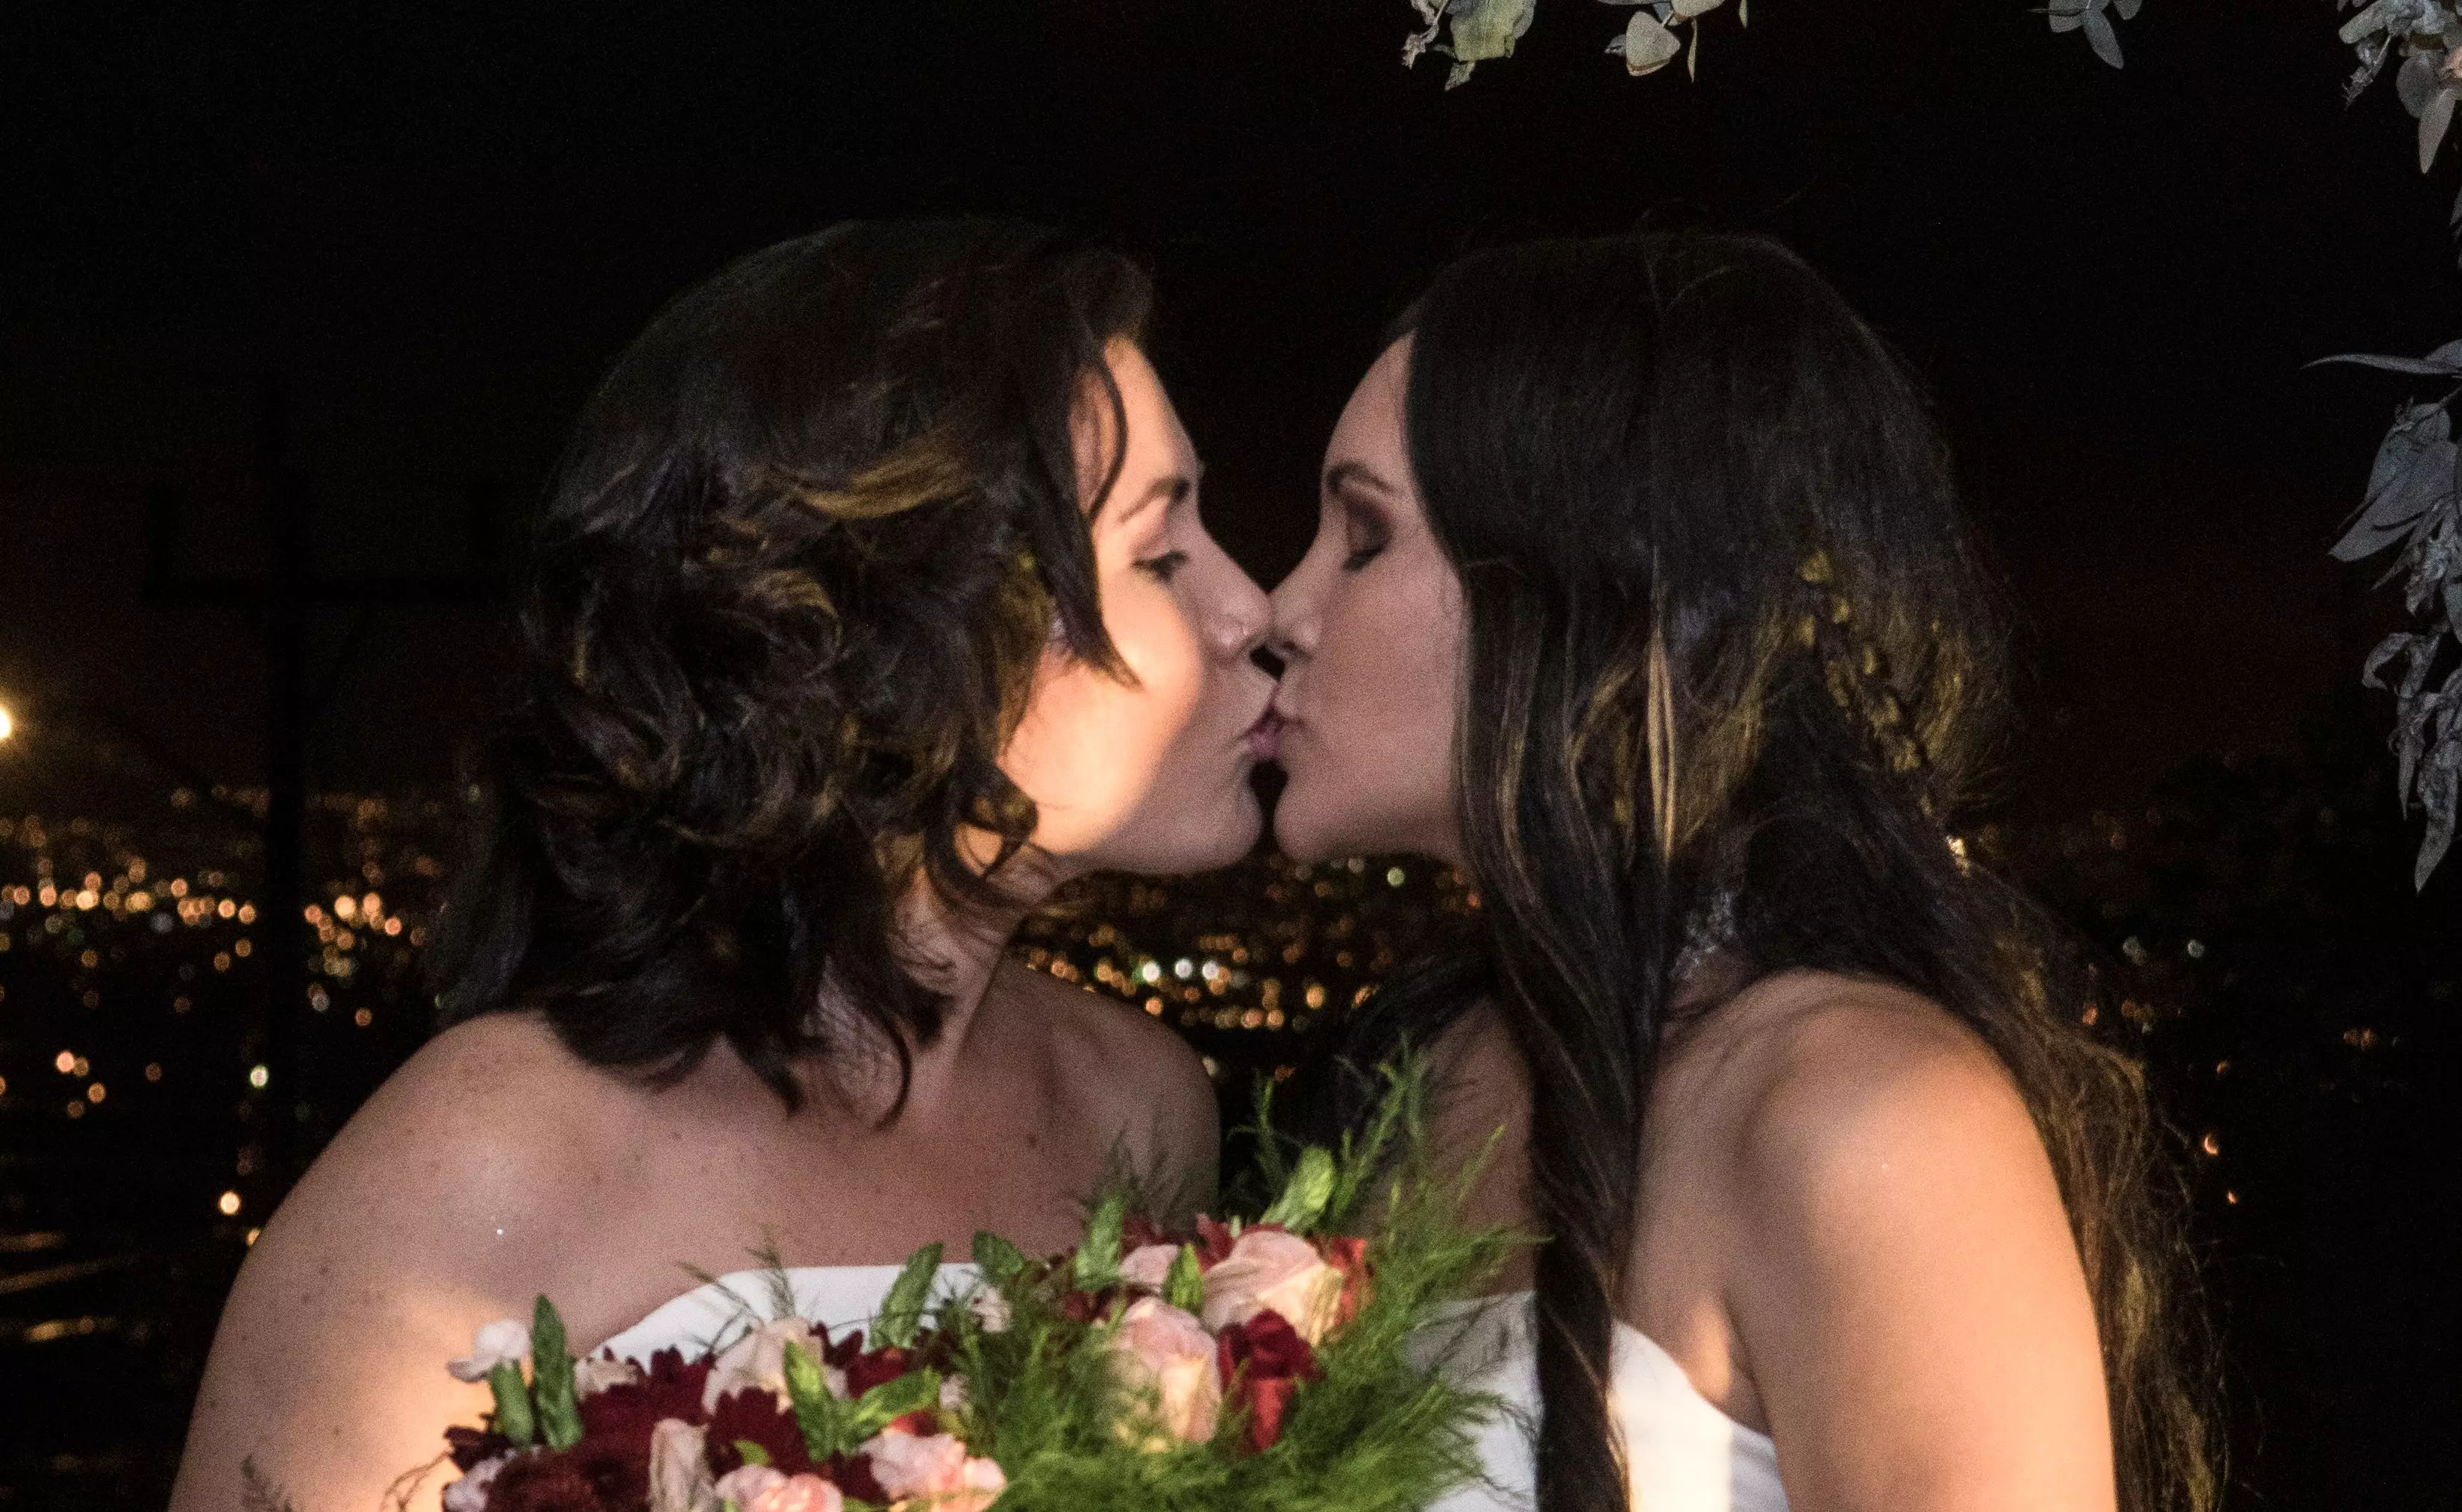 Alexandra Quiros (left) and Dunia Araya (right) were one of the first same-sex couples to tie the knot.